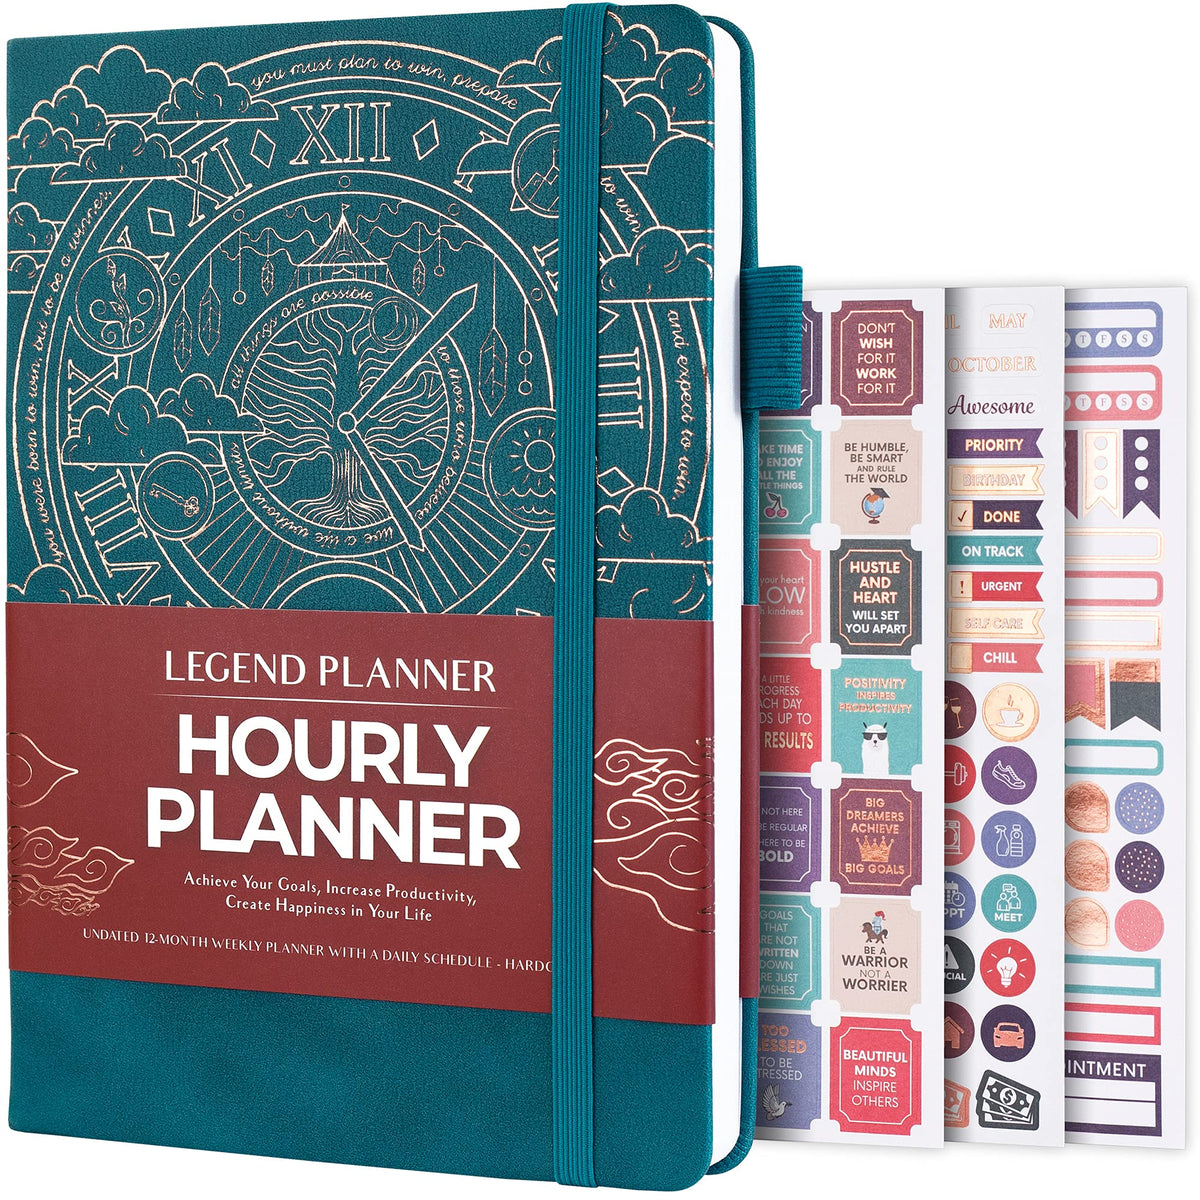 Legend Planner Hourly Schedule – Weekly & Daily Organizer with Time Slots. Appointment Book Journal for Work, Undated, A5 (Dark Teal)